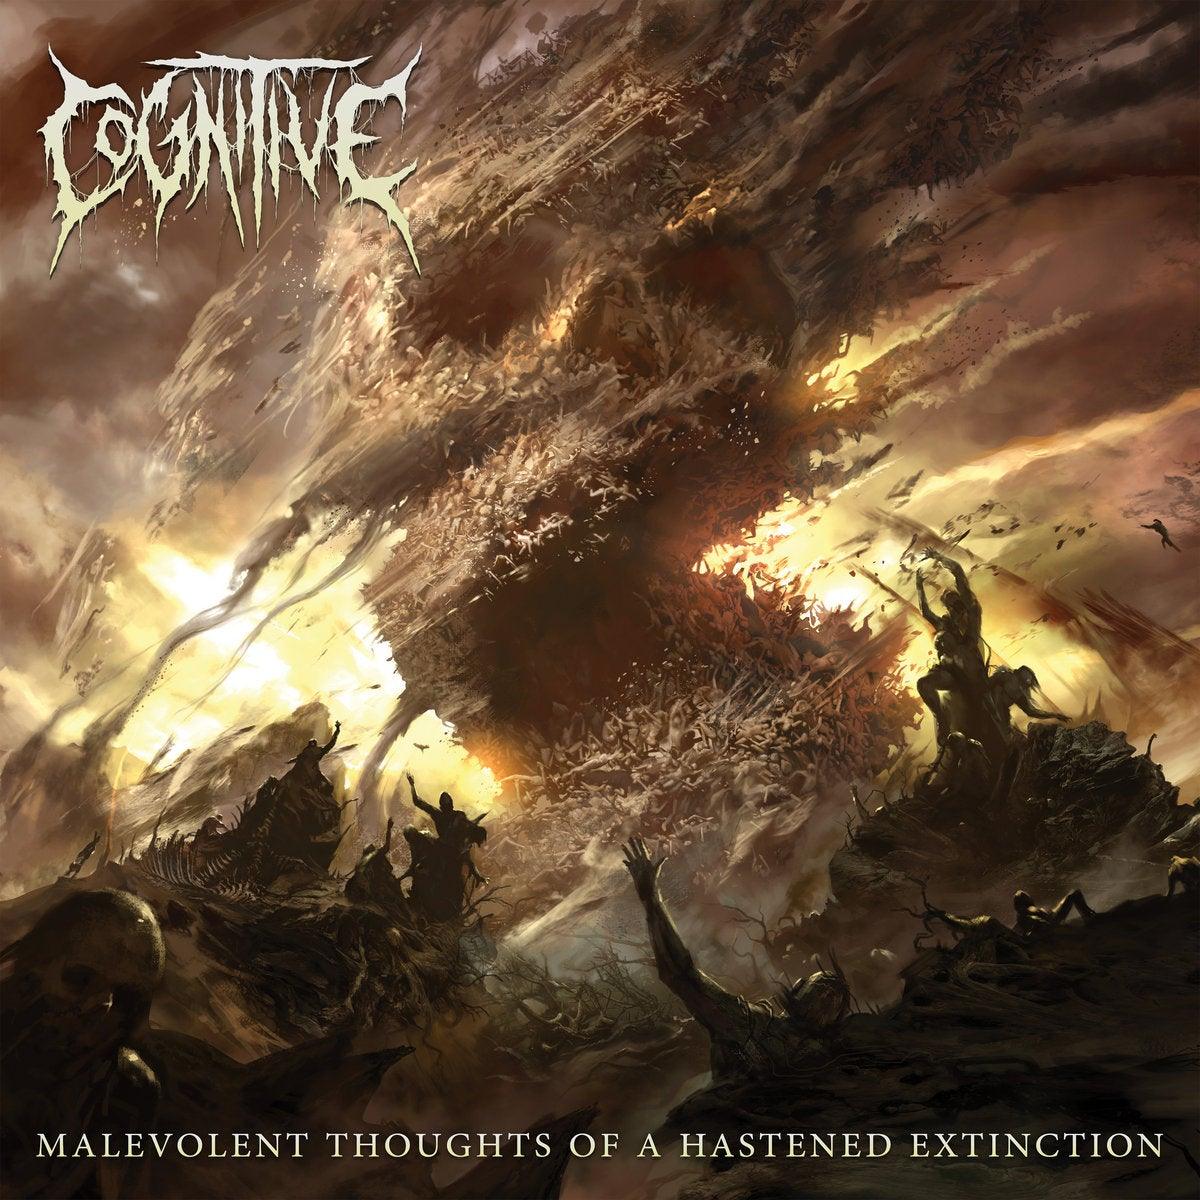 Buy – Cognitive "Malevolent Thoughts Of A Hastened Extinction" CD – Band & Music Merch – Cold Cuts Merch